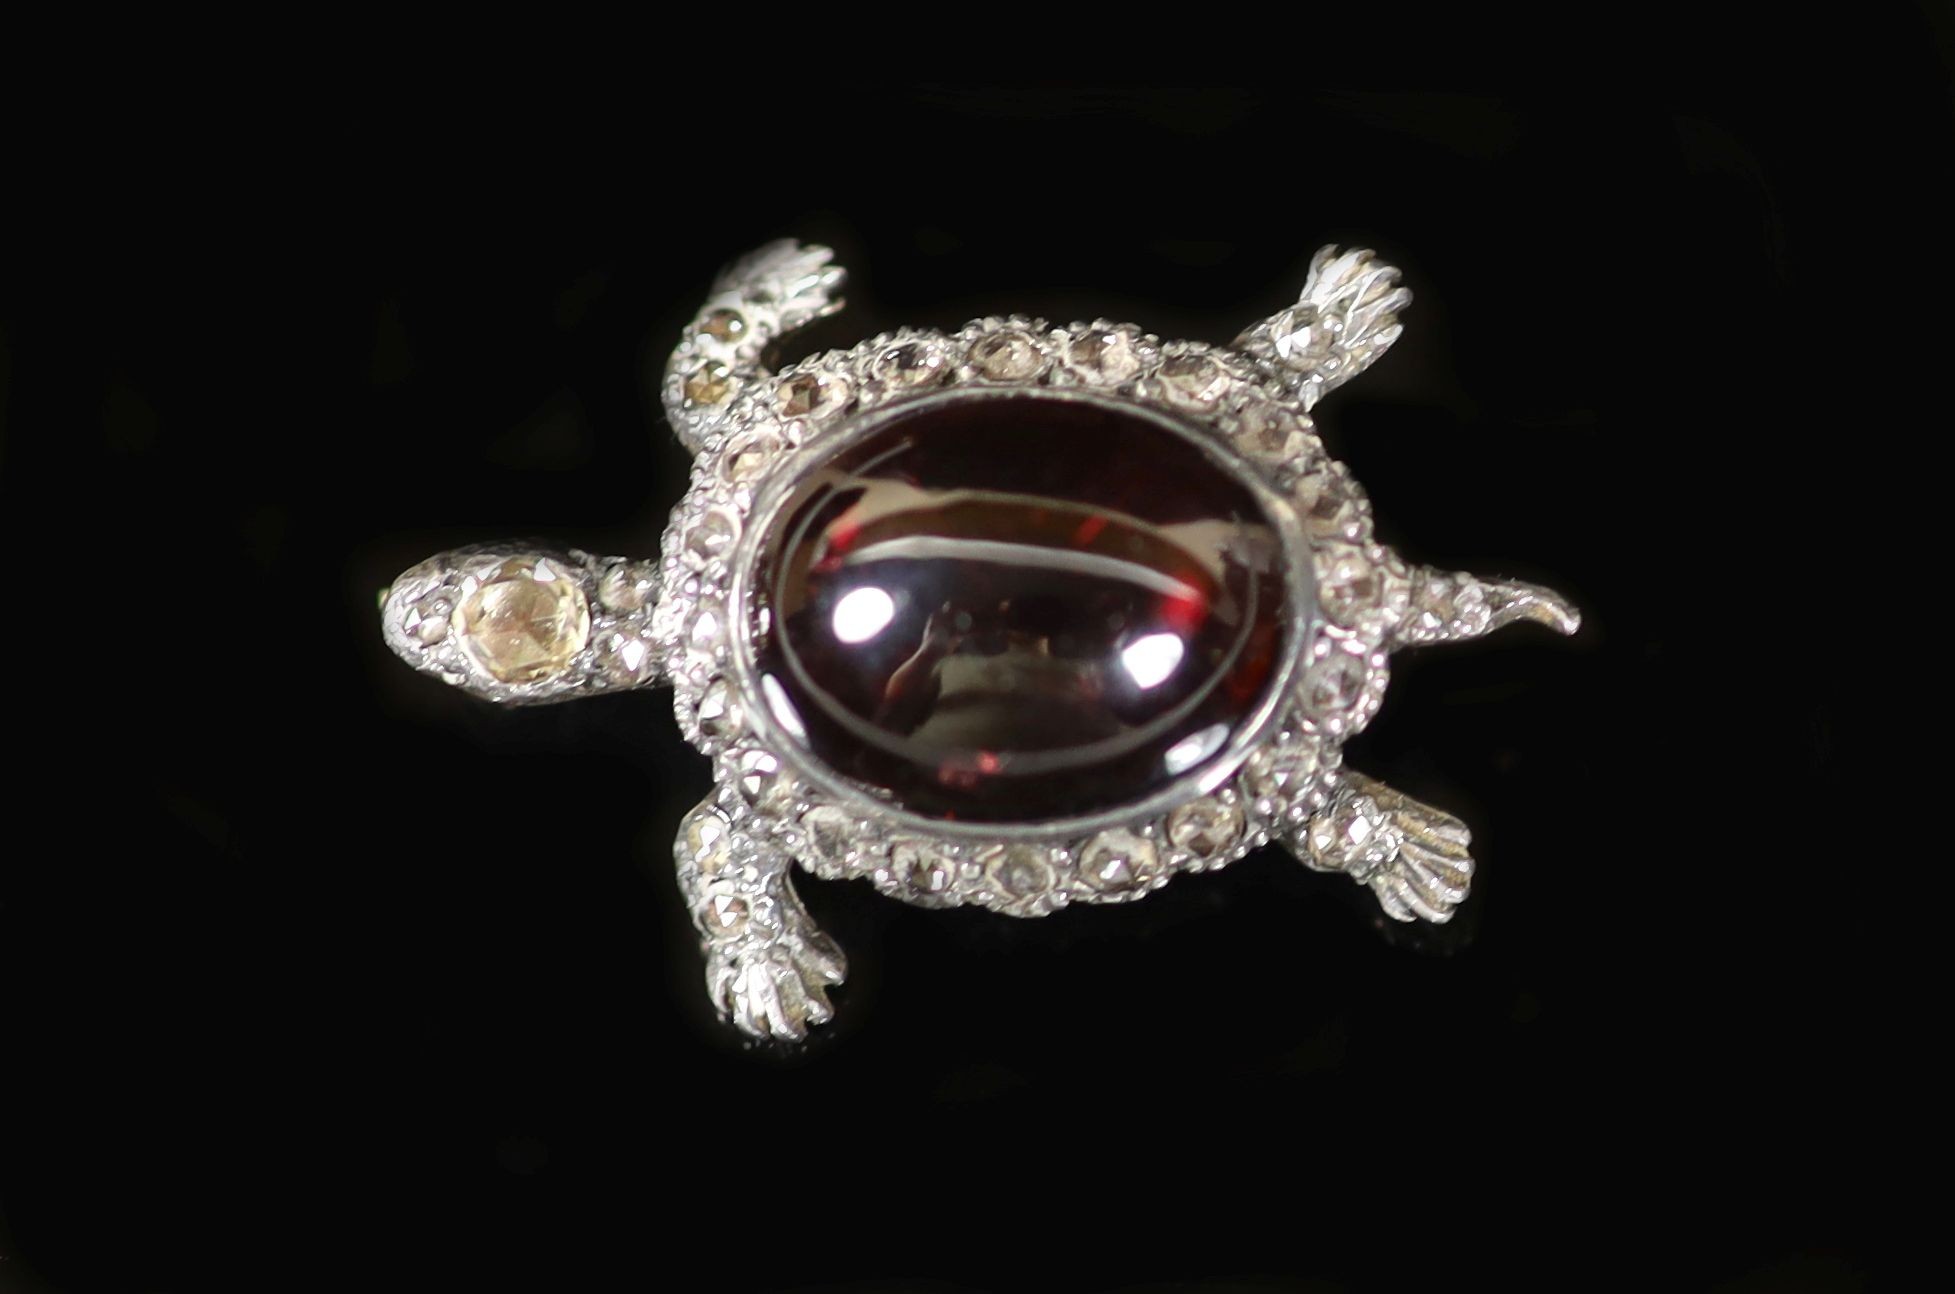 An Edwardian gold and silver, cabochon garnet and diamond set brooch, modelled as a tortoise